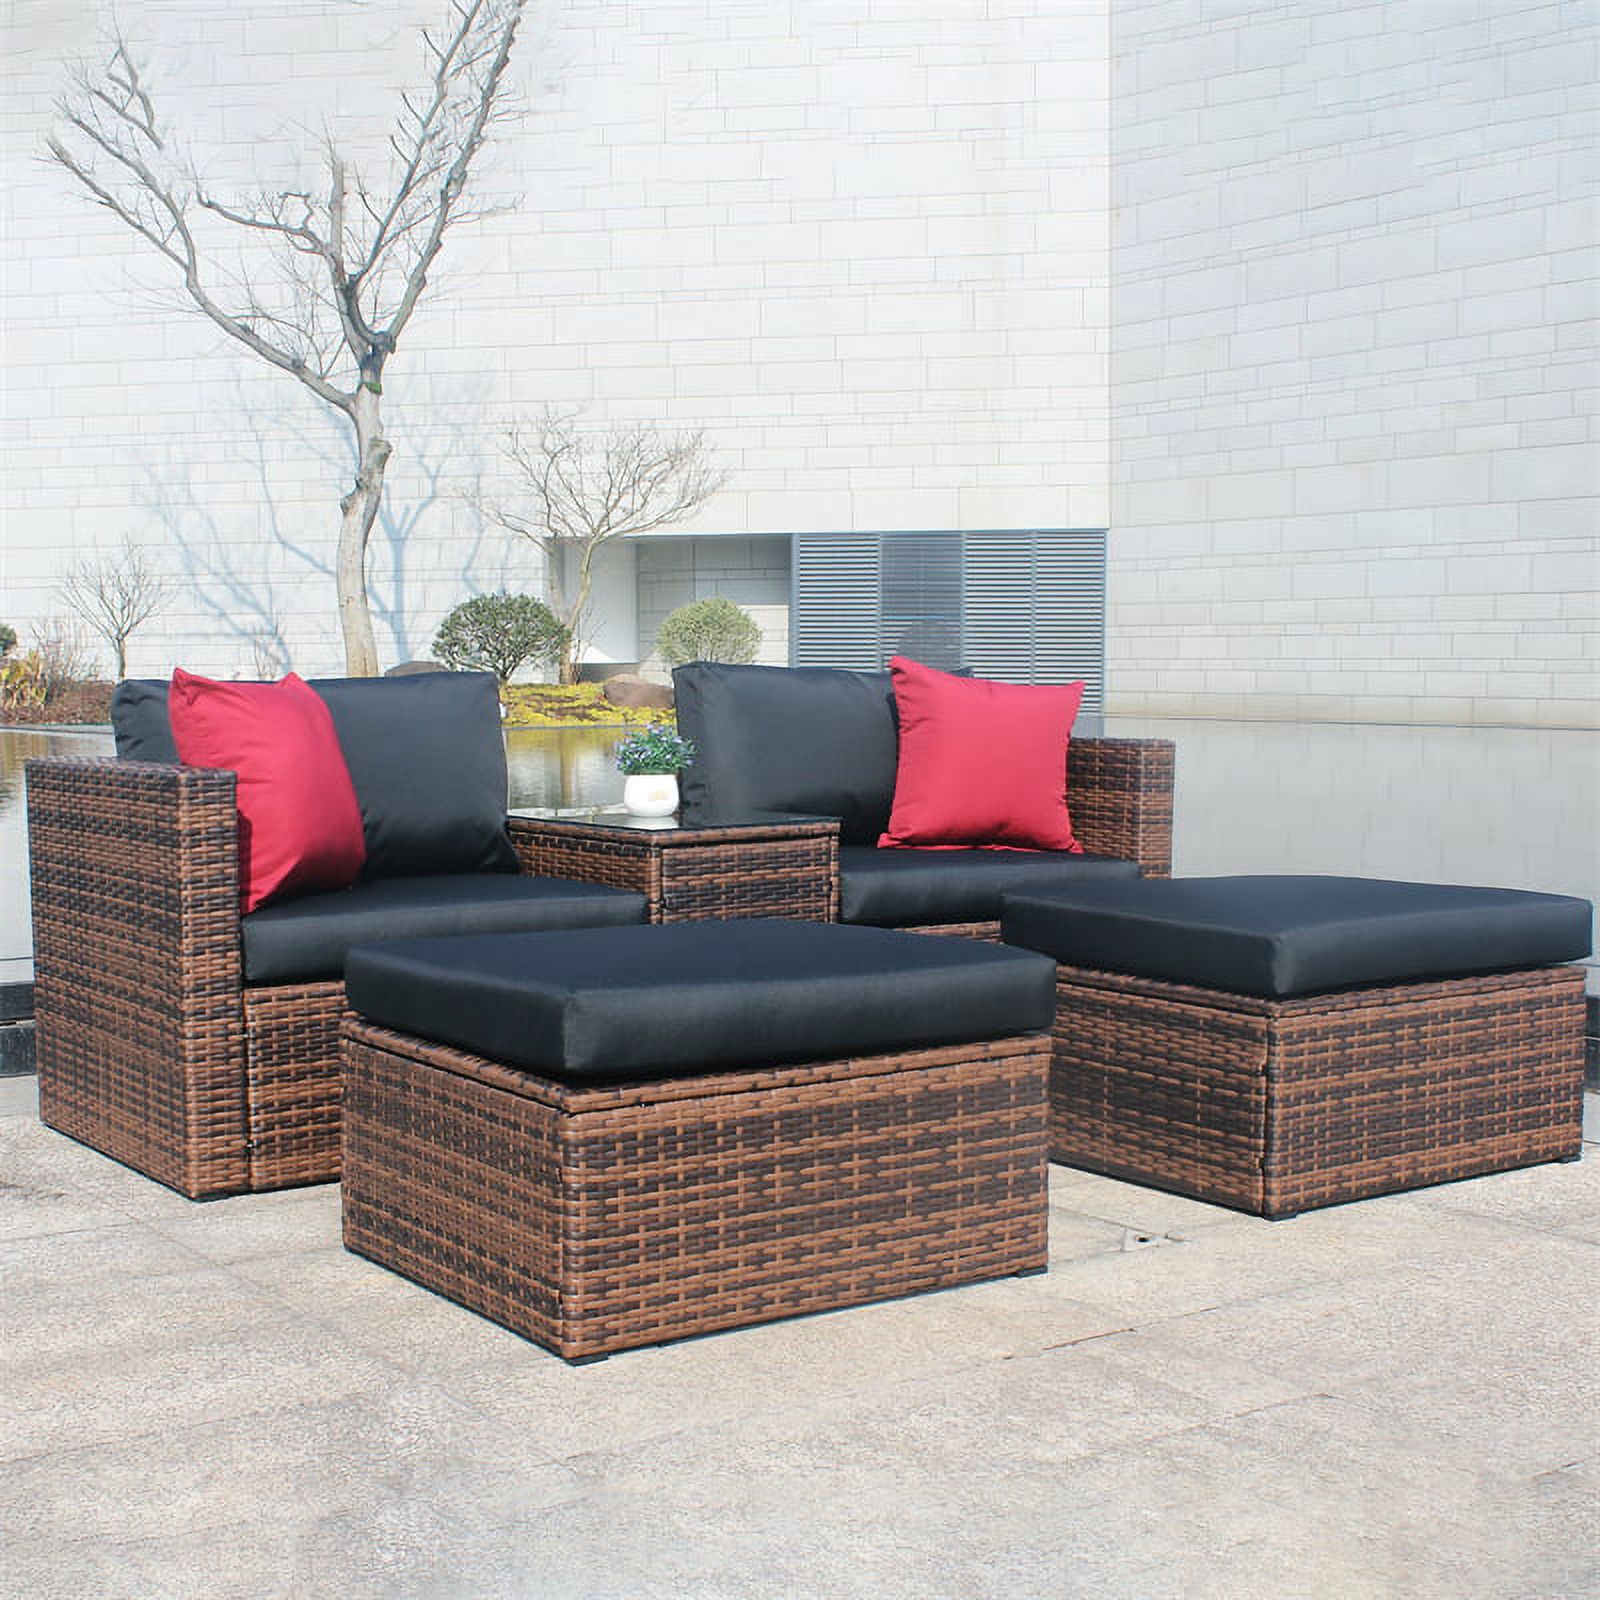 5 Pieces Outdoor Patio Sectional Sofa Set, Rattan and Black Cushion with Weather Protecting Cover, Patio Sofa Sets with 2 Rattan Chairs, 2 Pieces Patio Rattan Ottomans and Coffee Table - image 3 of 7